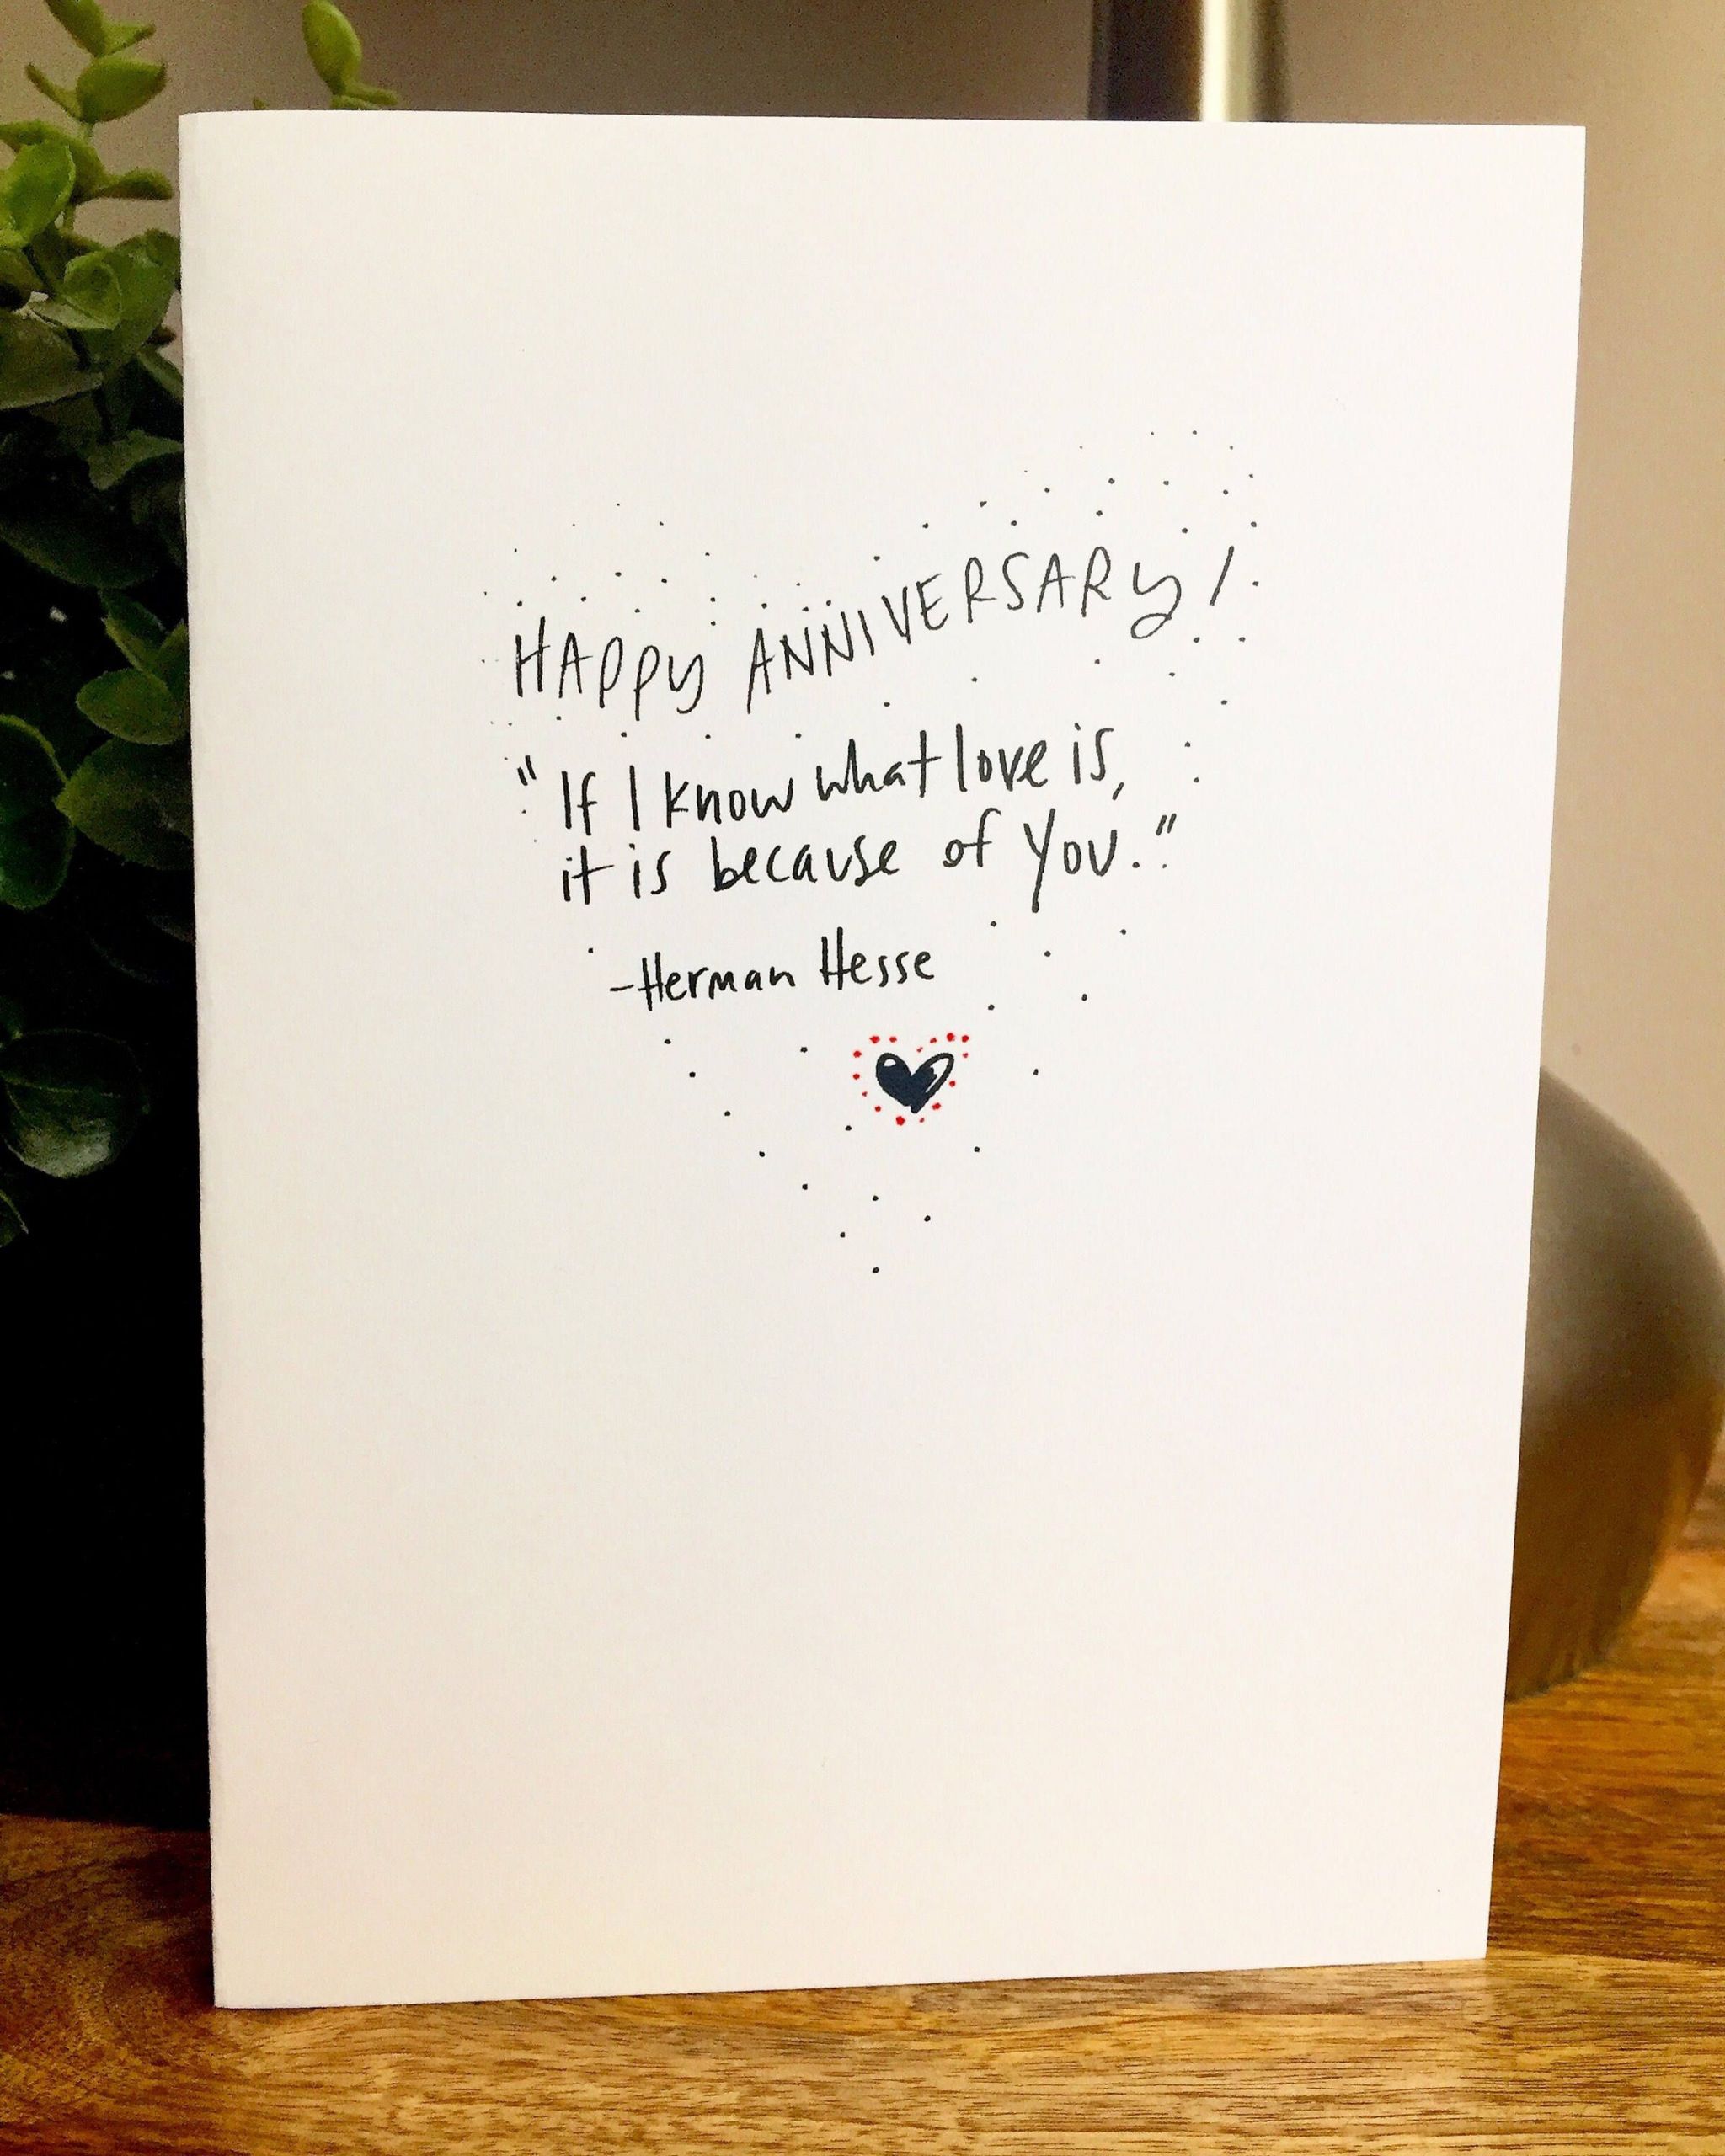 One Year Anniversary Quotes For Her
 I know what love is e Year Anniversary Card for her